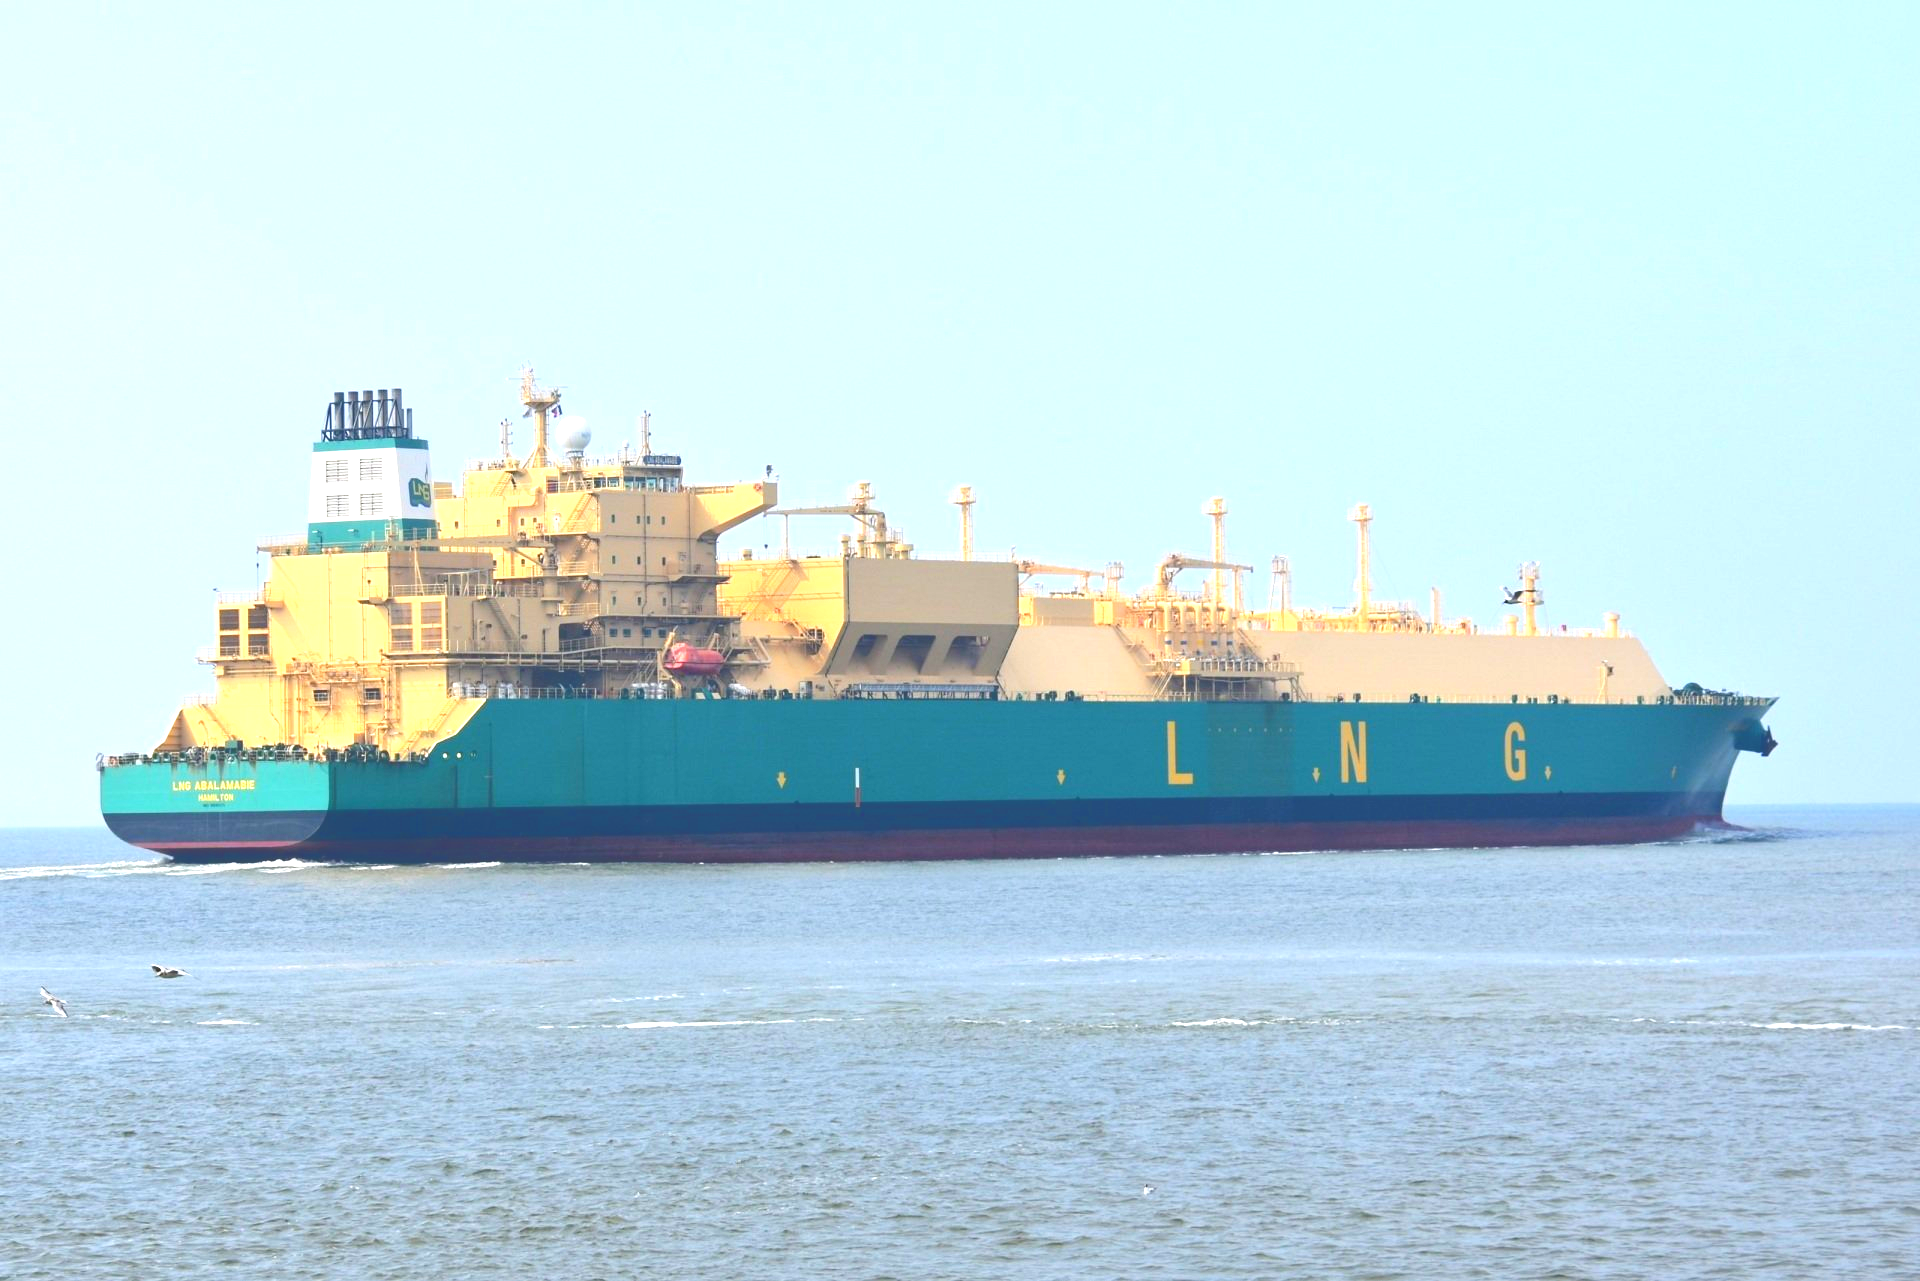 Most expensive vessel charter: The ship LNG Abalamabie sets world record